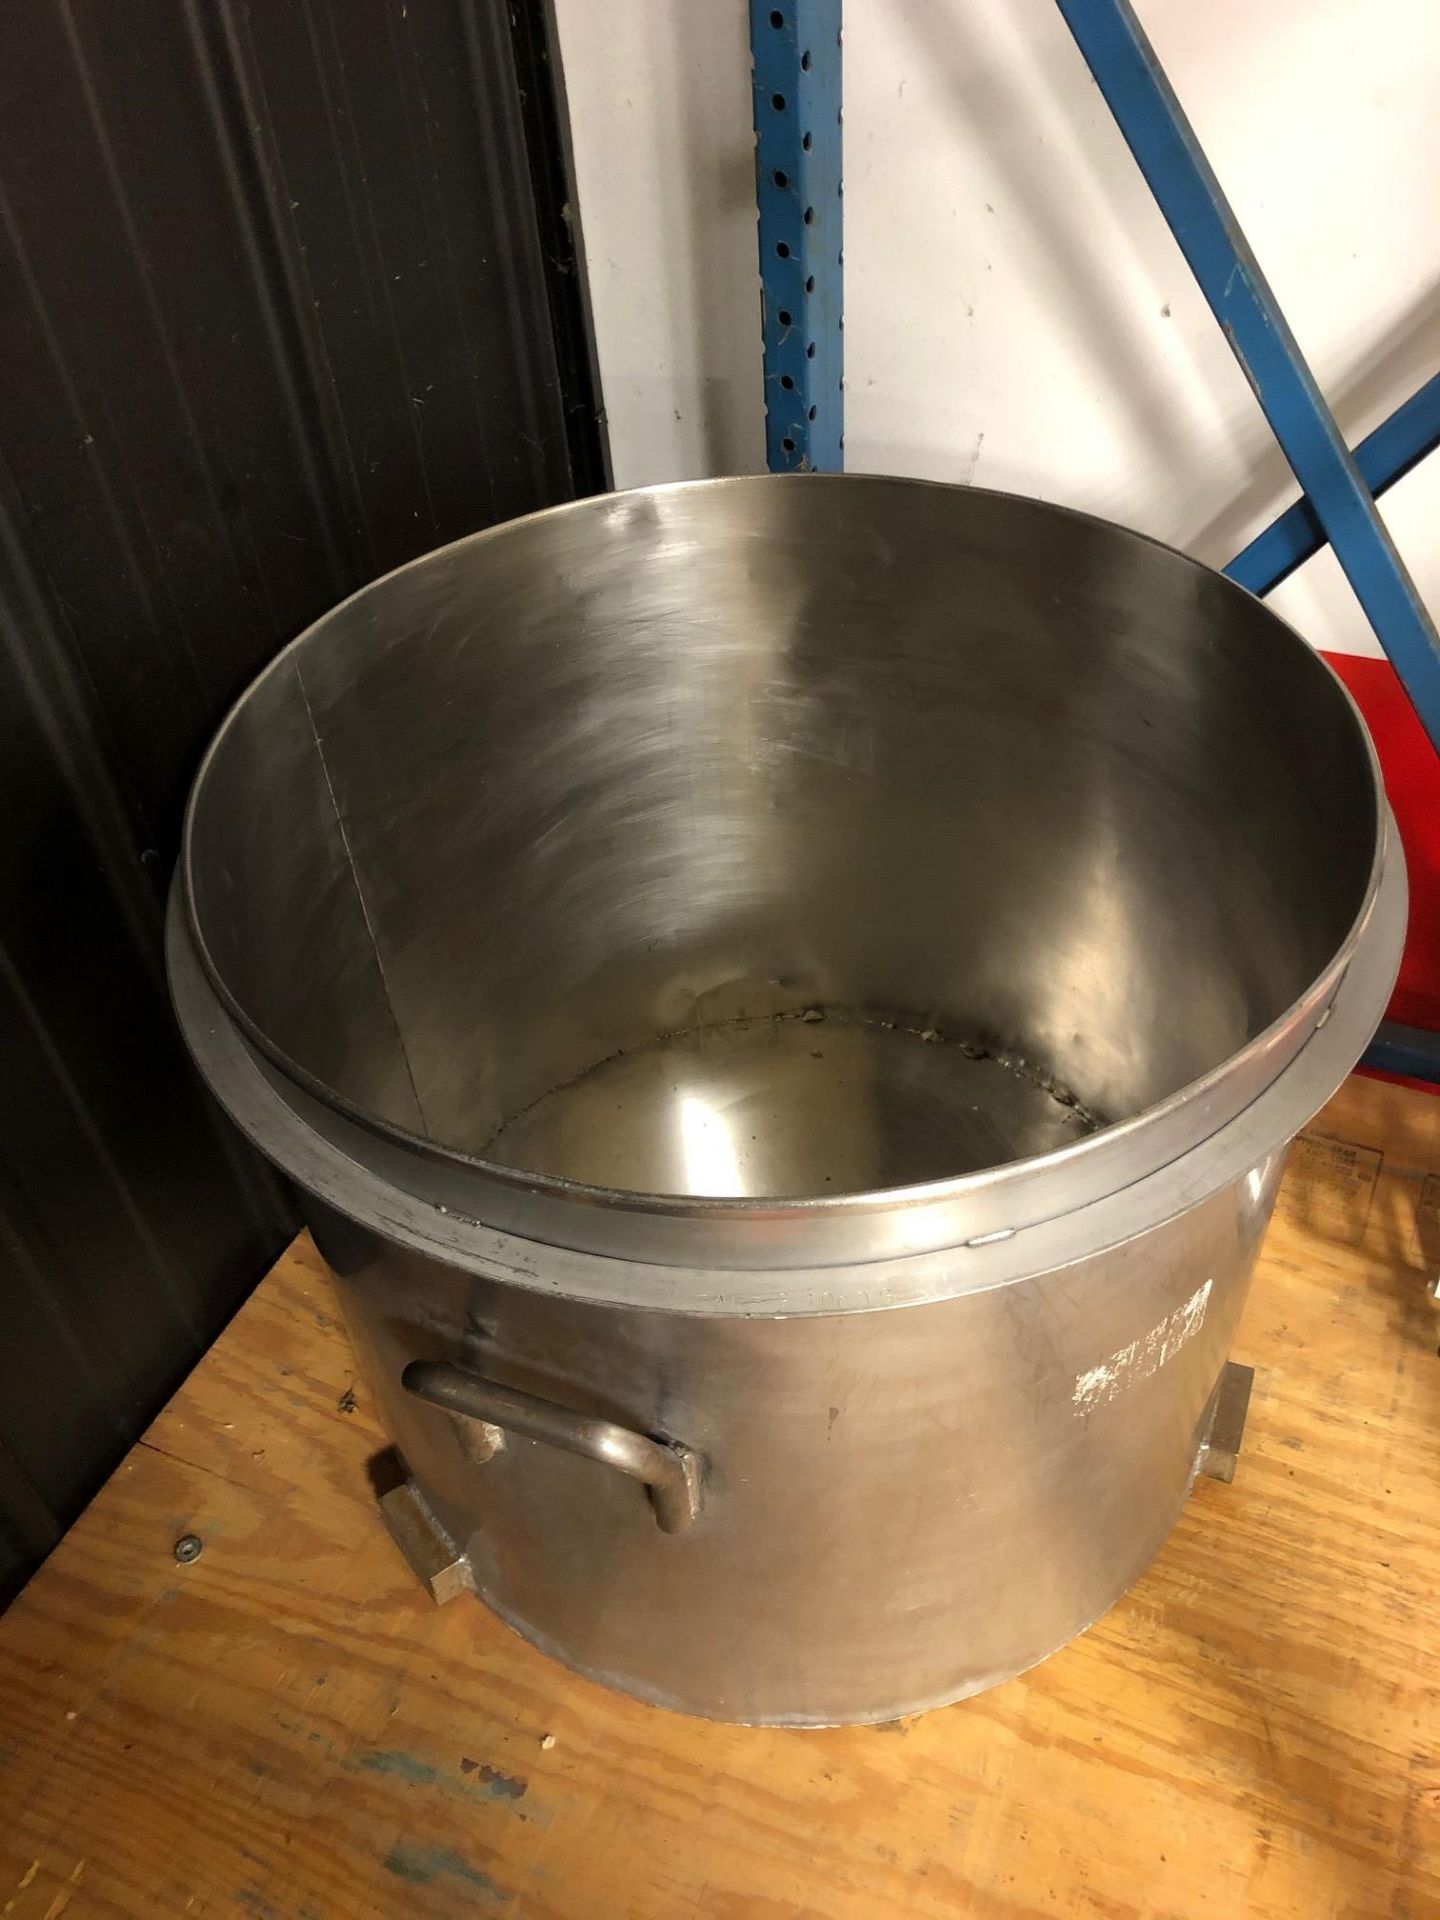 Qty 3 - Stainless Steel Pots. Includes the following: 1) - Stainless Steel Pots with outlet. 24 inch - Image 4 of 4